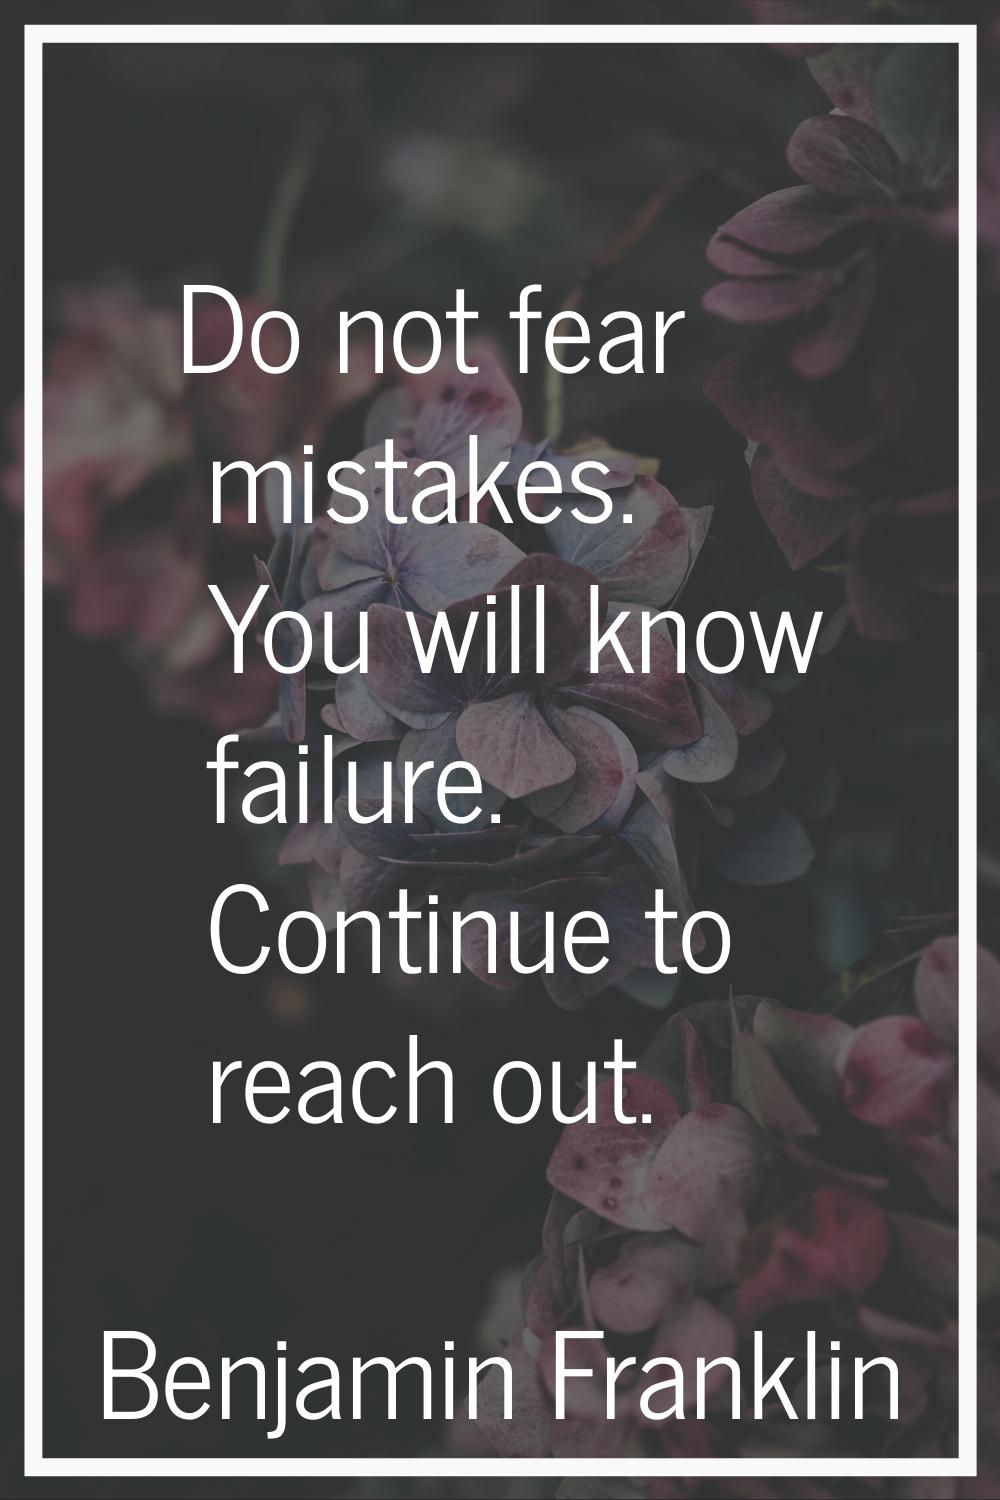 Do not fear mistakes. You will know failure. Continue to reach out.